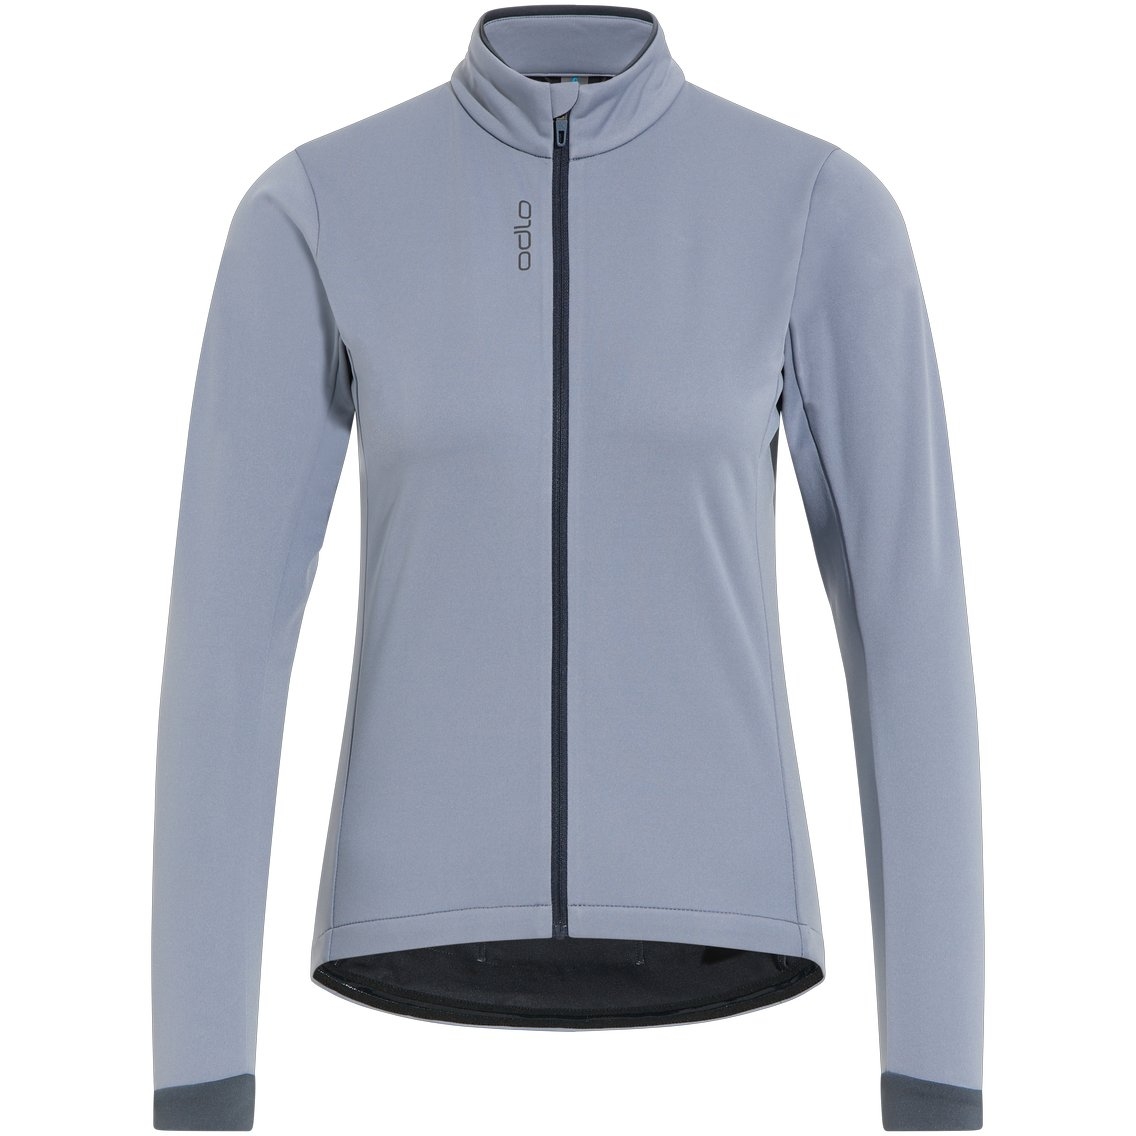 Picture of Odlo Zeroweight Warm Cycling Jacket Women - folkstone gray